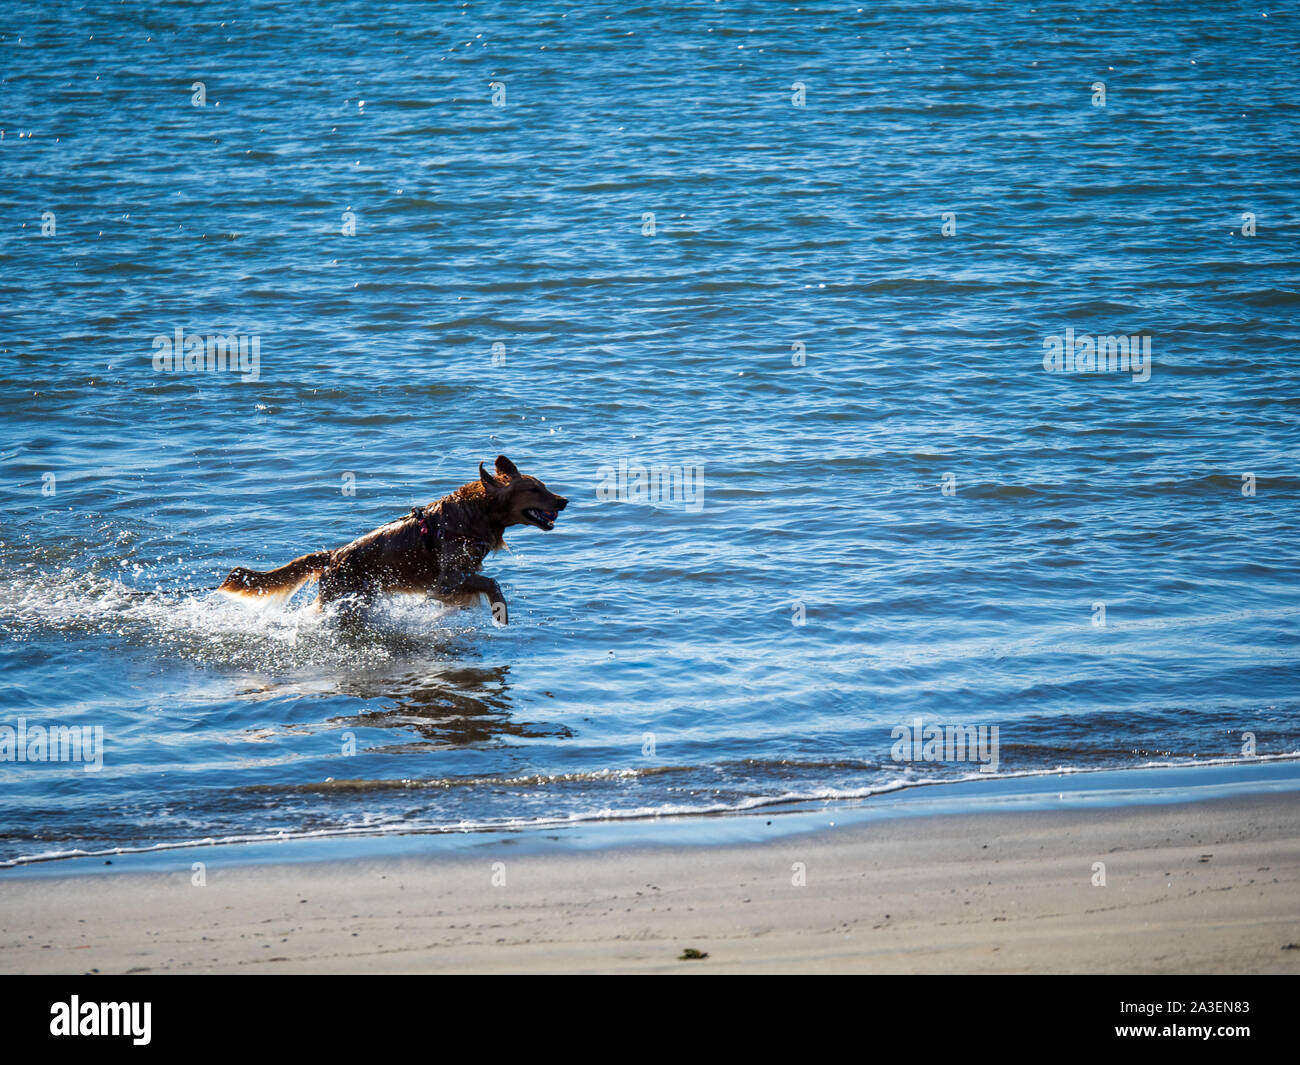 Golden retriever dog jumping out of ocean water onto beach with a ball in mouth Stock Photo